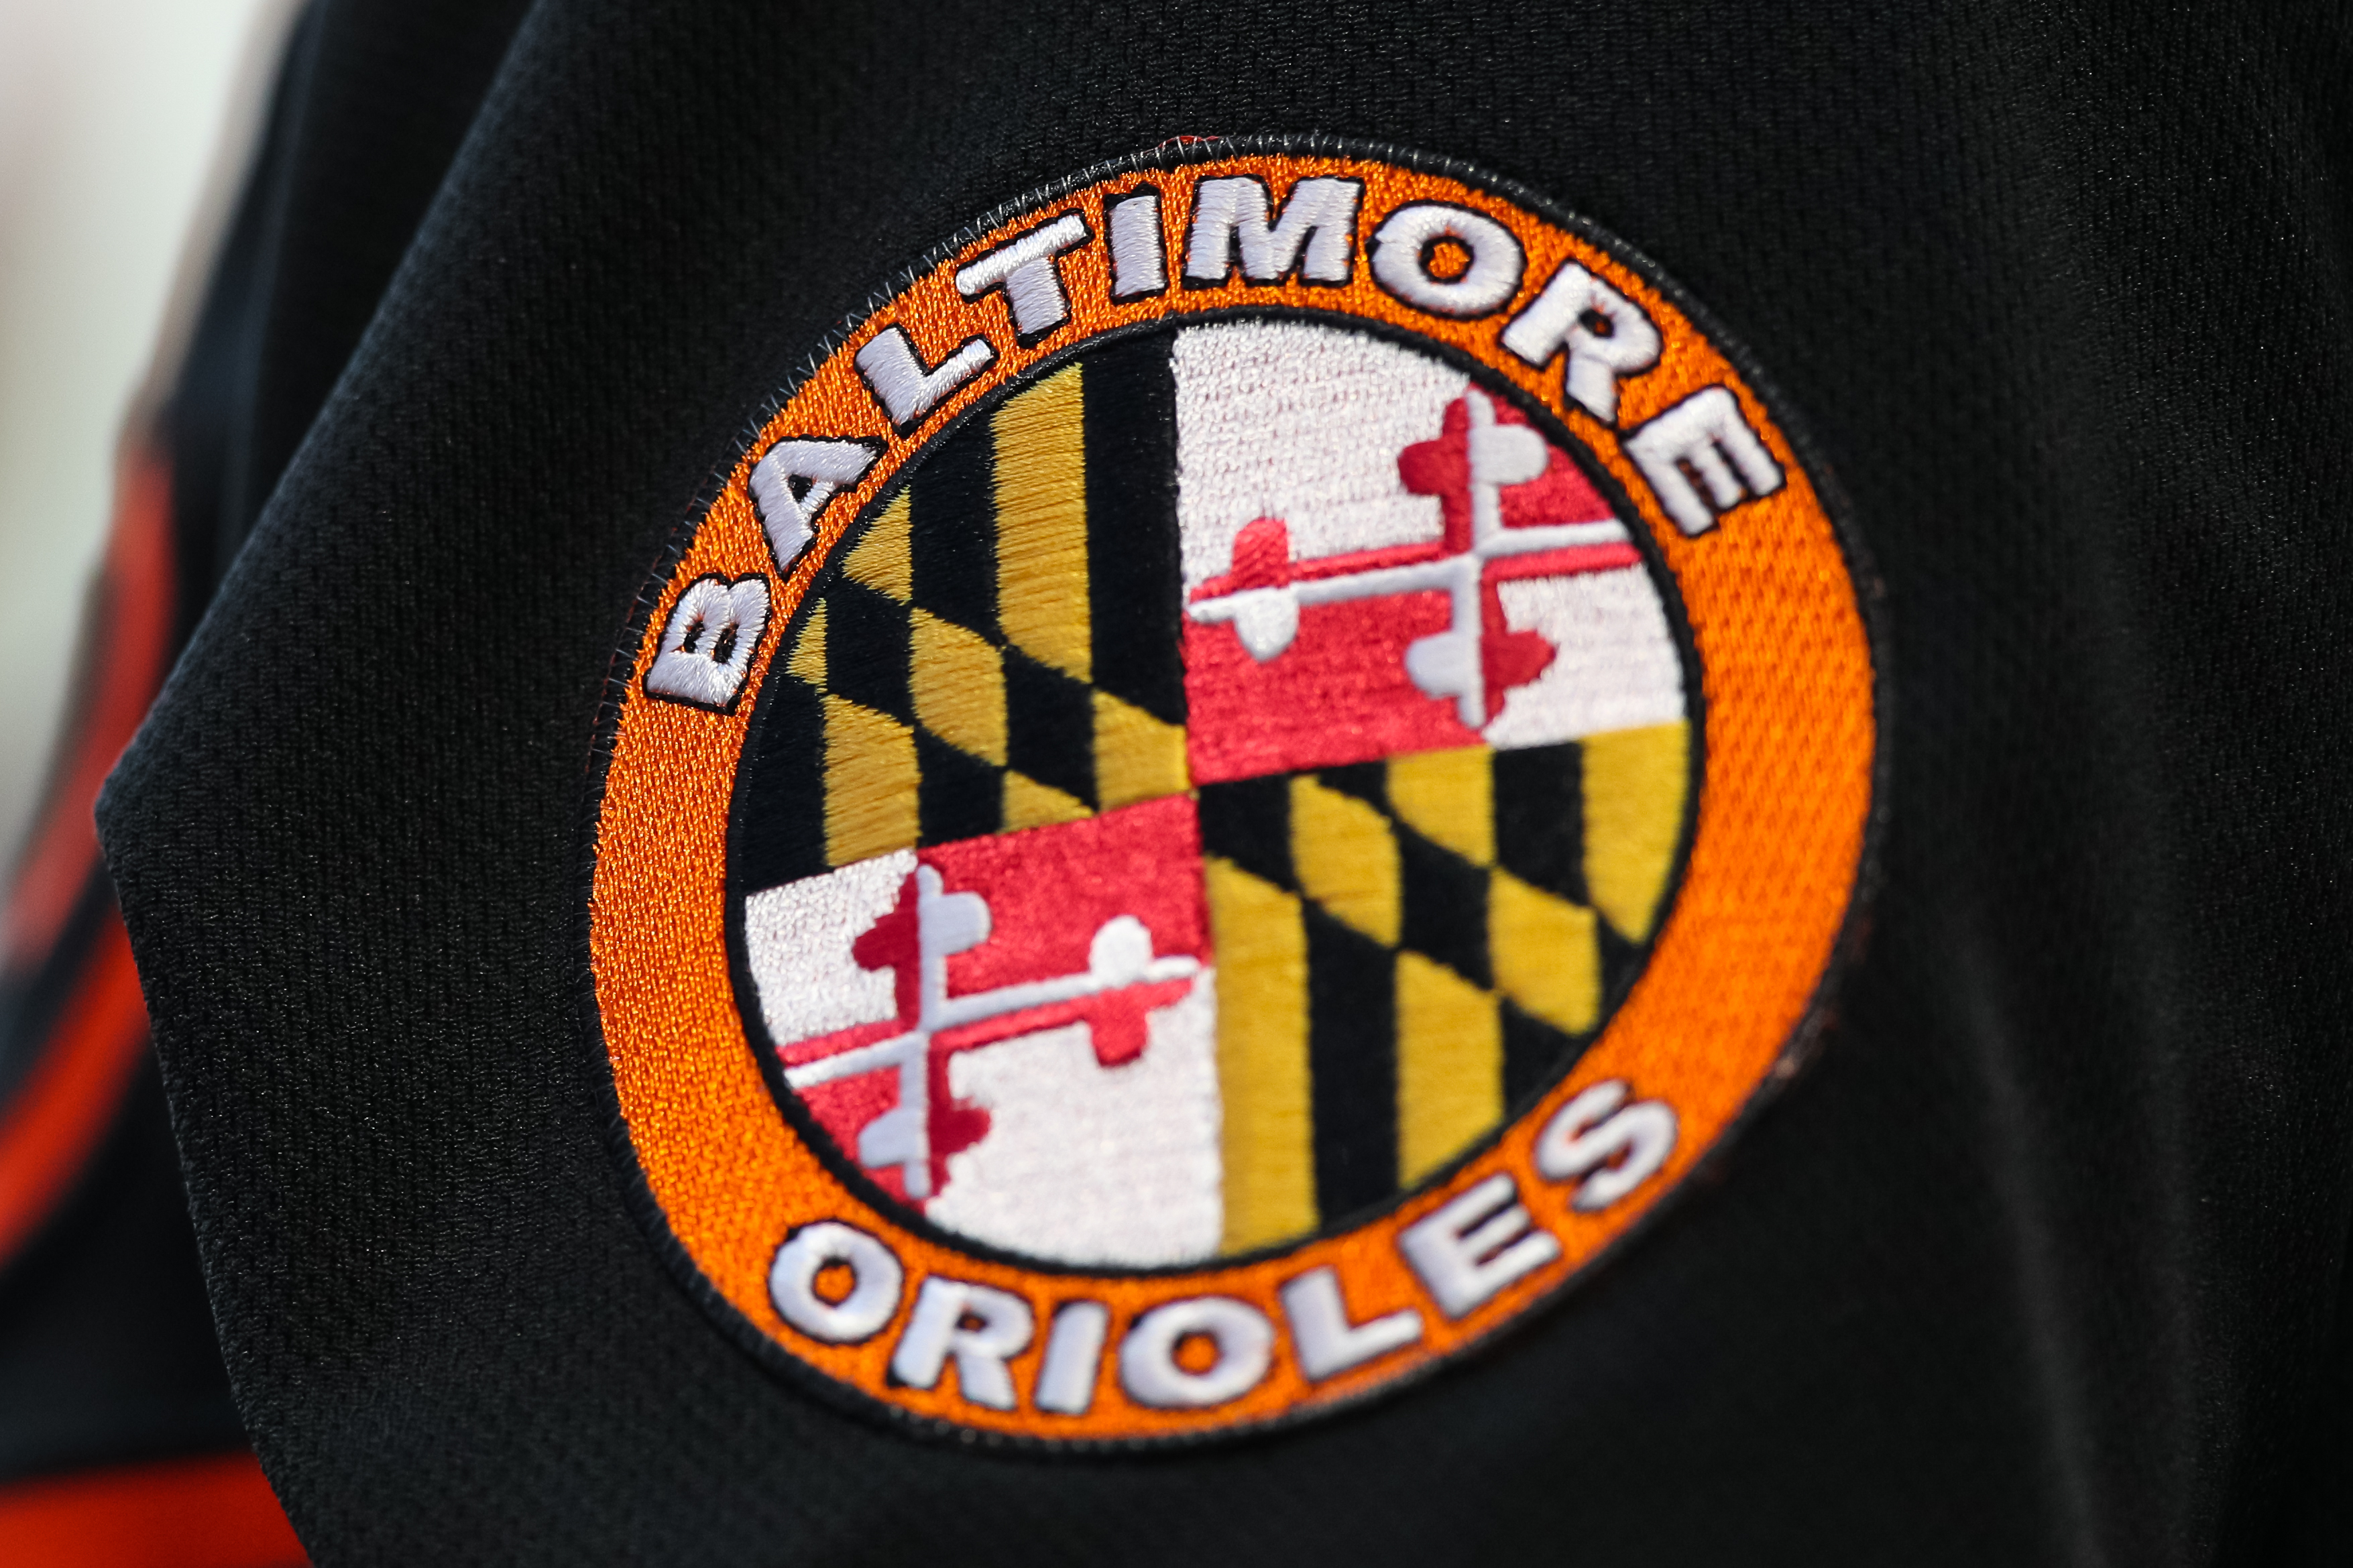 orioles new jersey